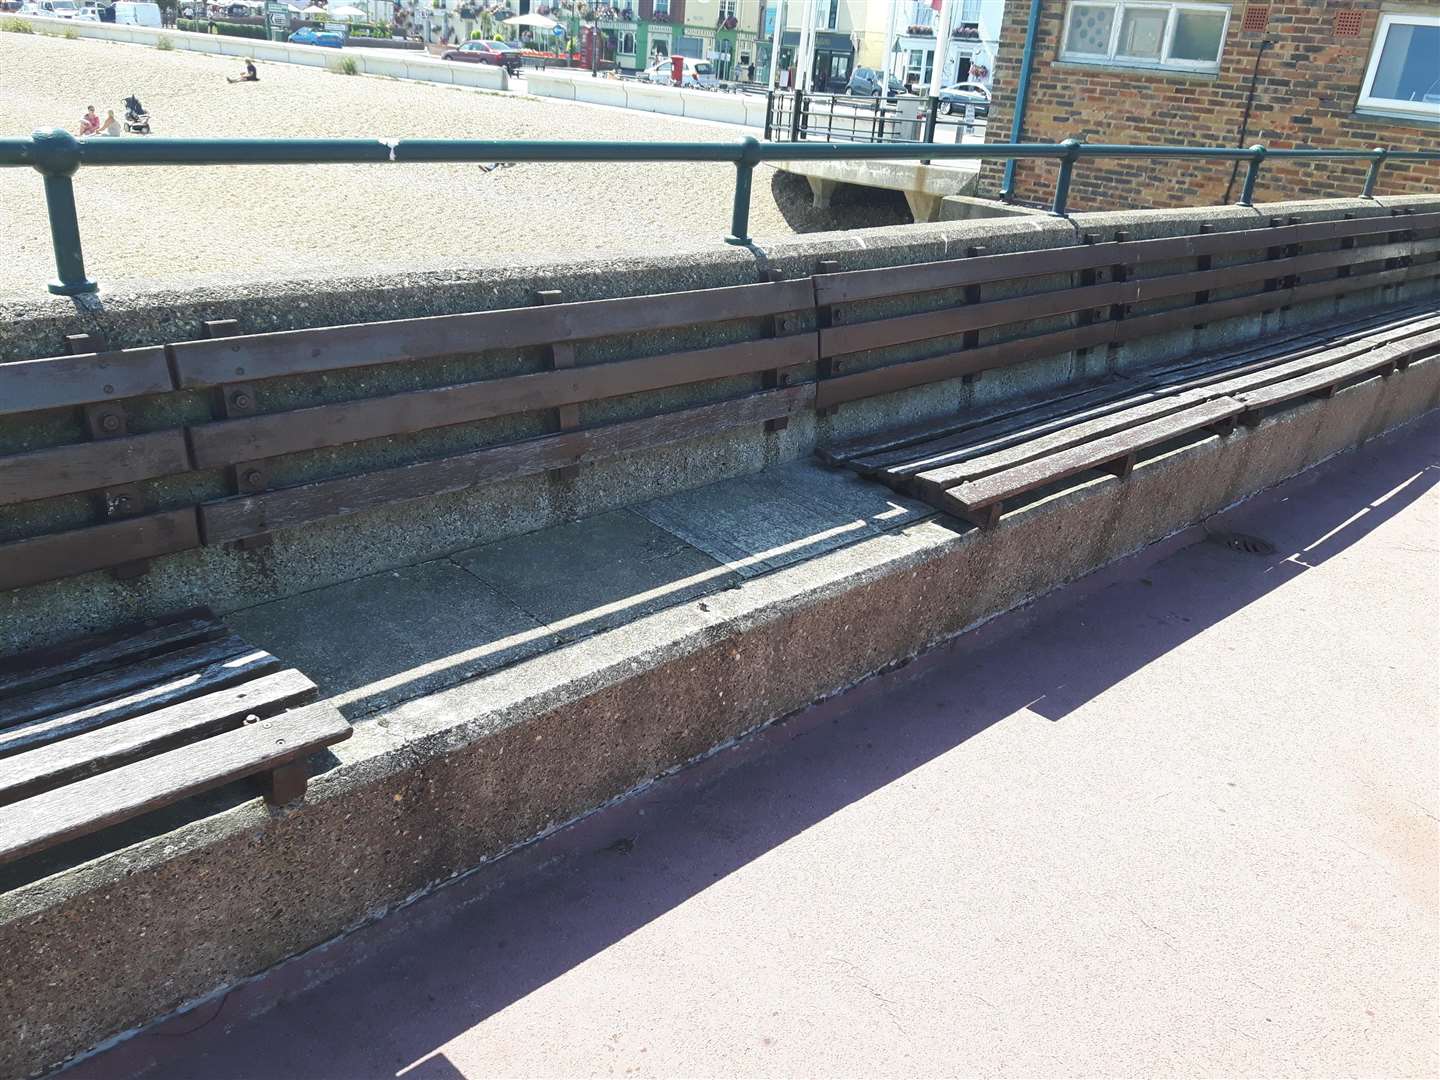 Timbers from the old benches, pictured, are being given away